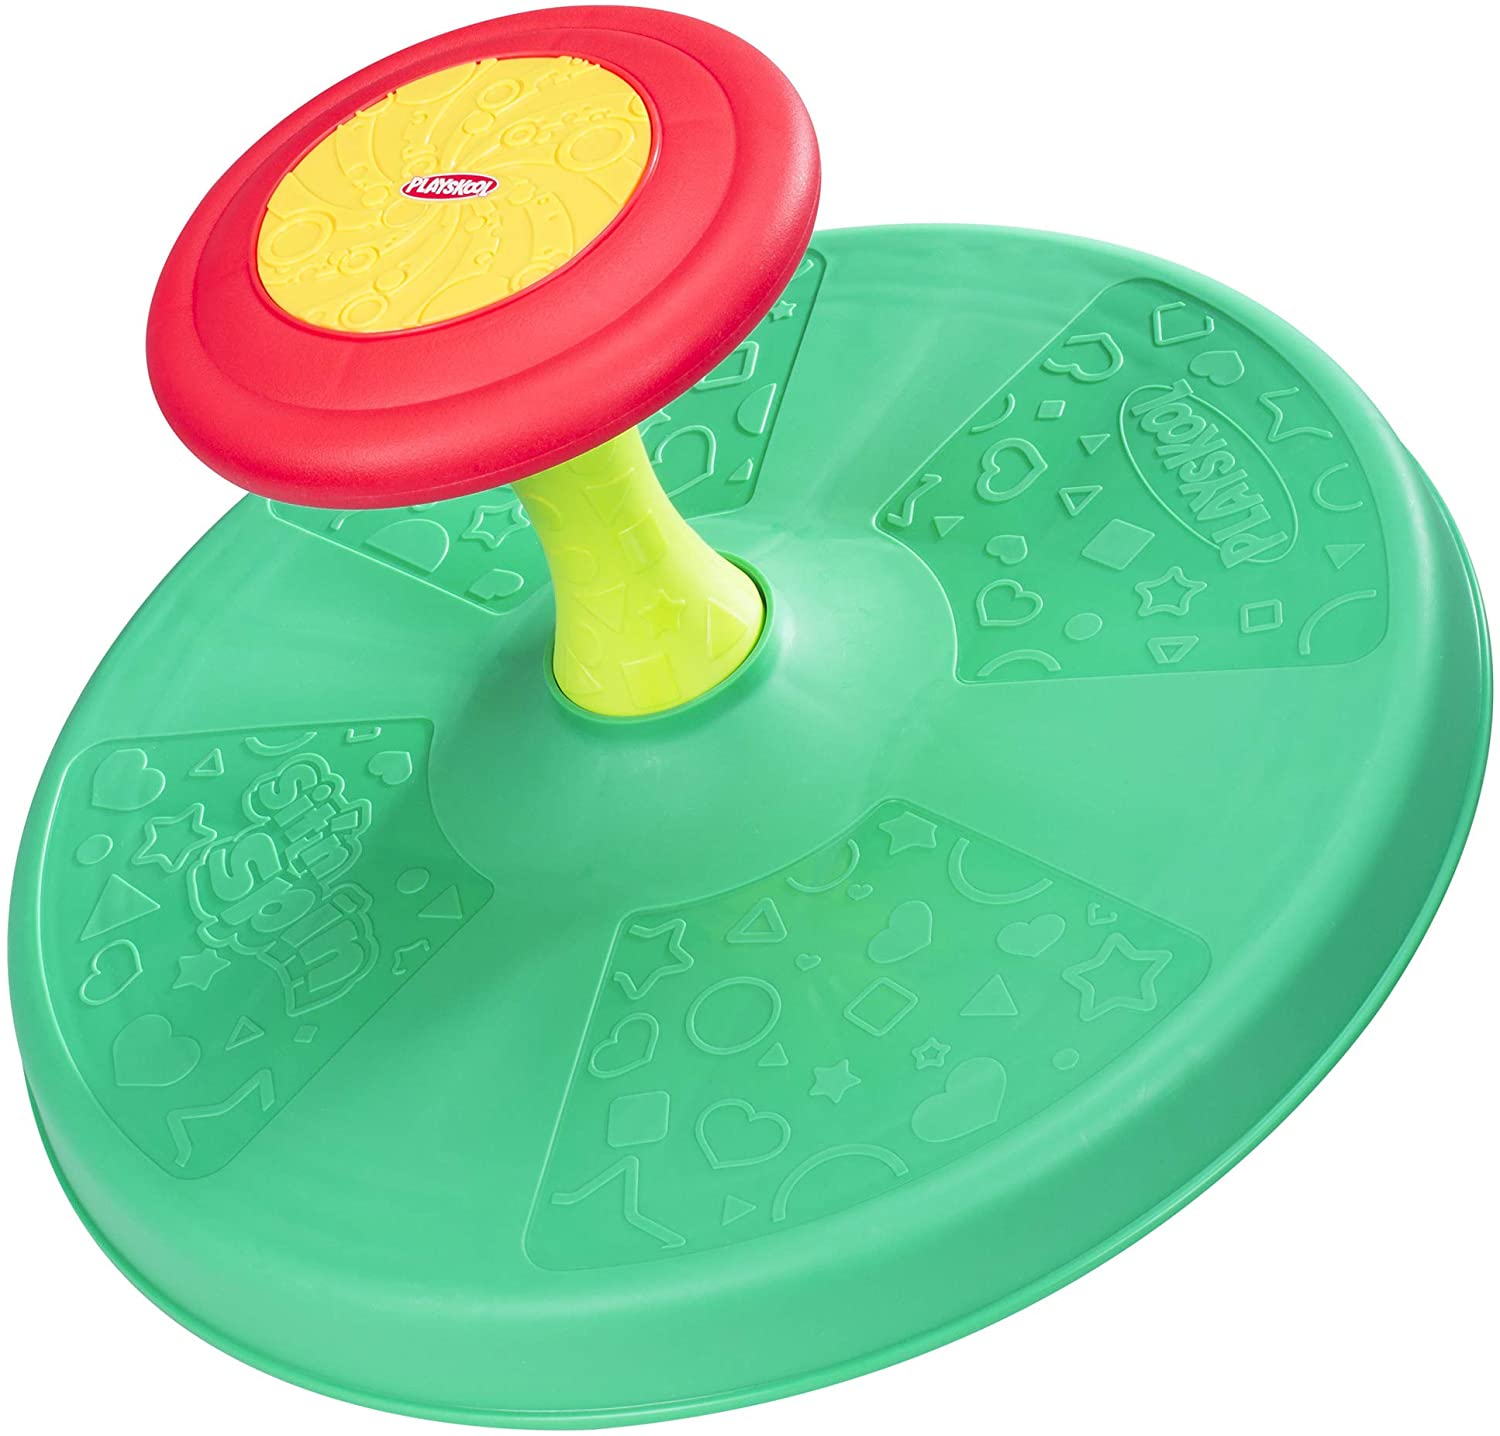 Playskool Classic Sit ‘n Spin Spinning Activity